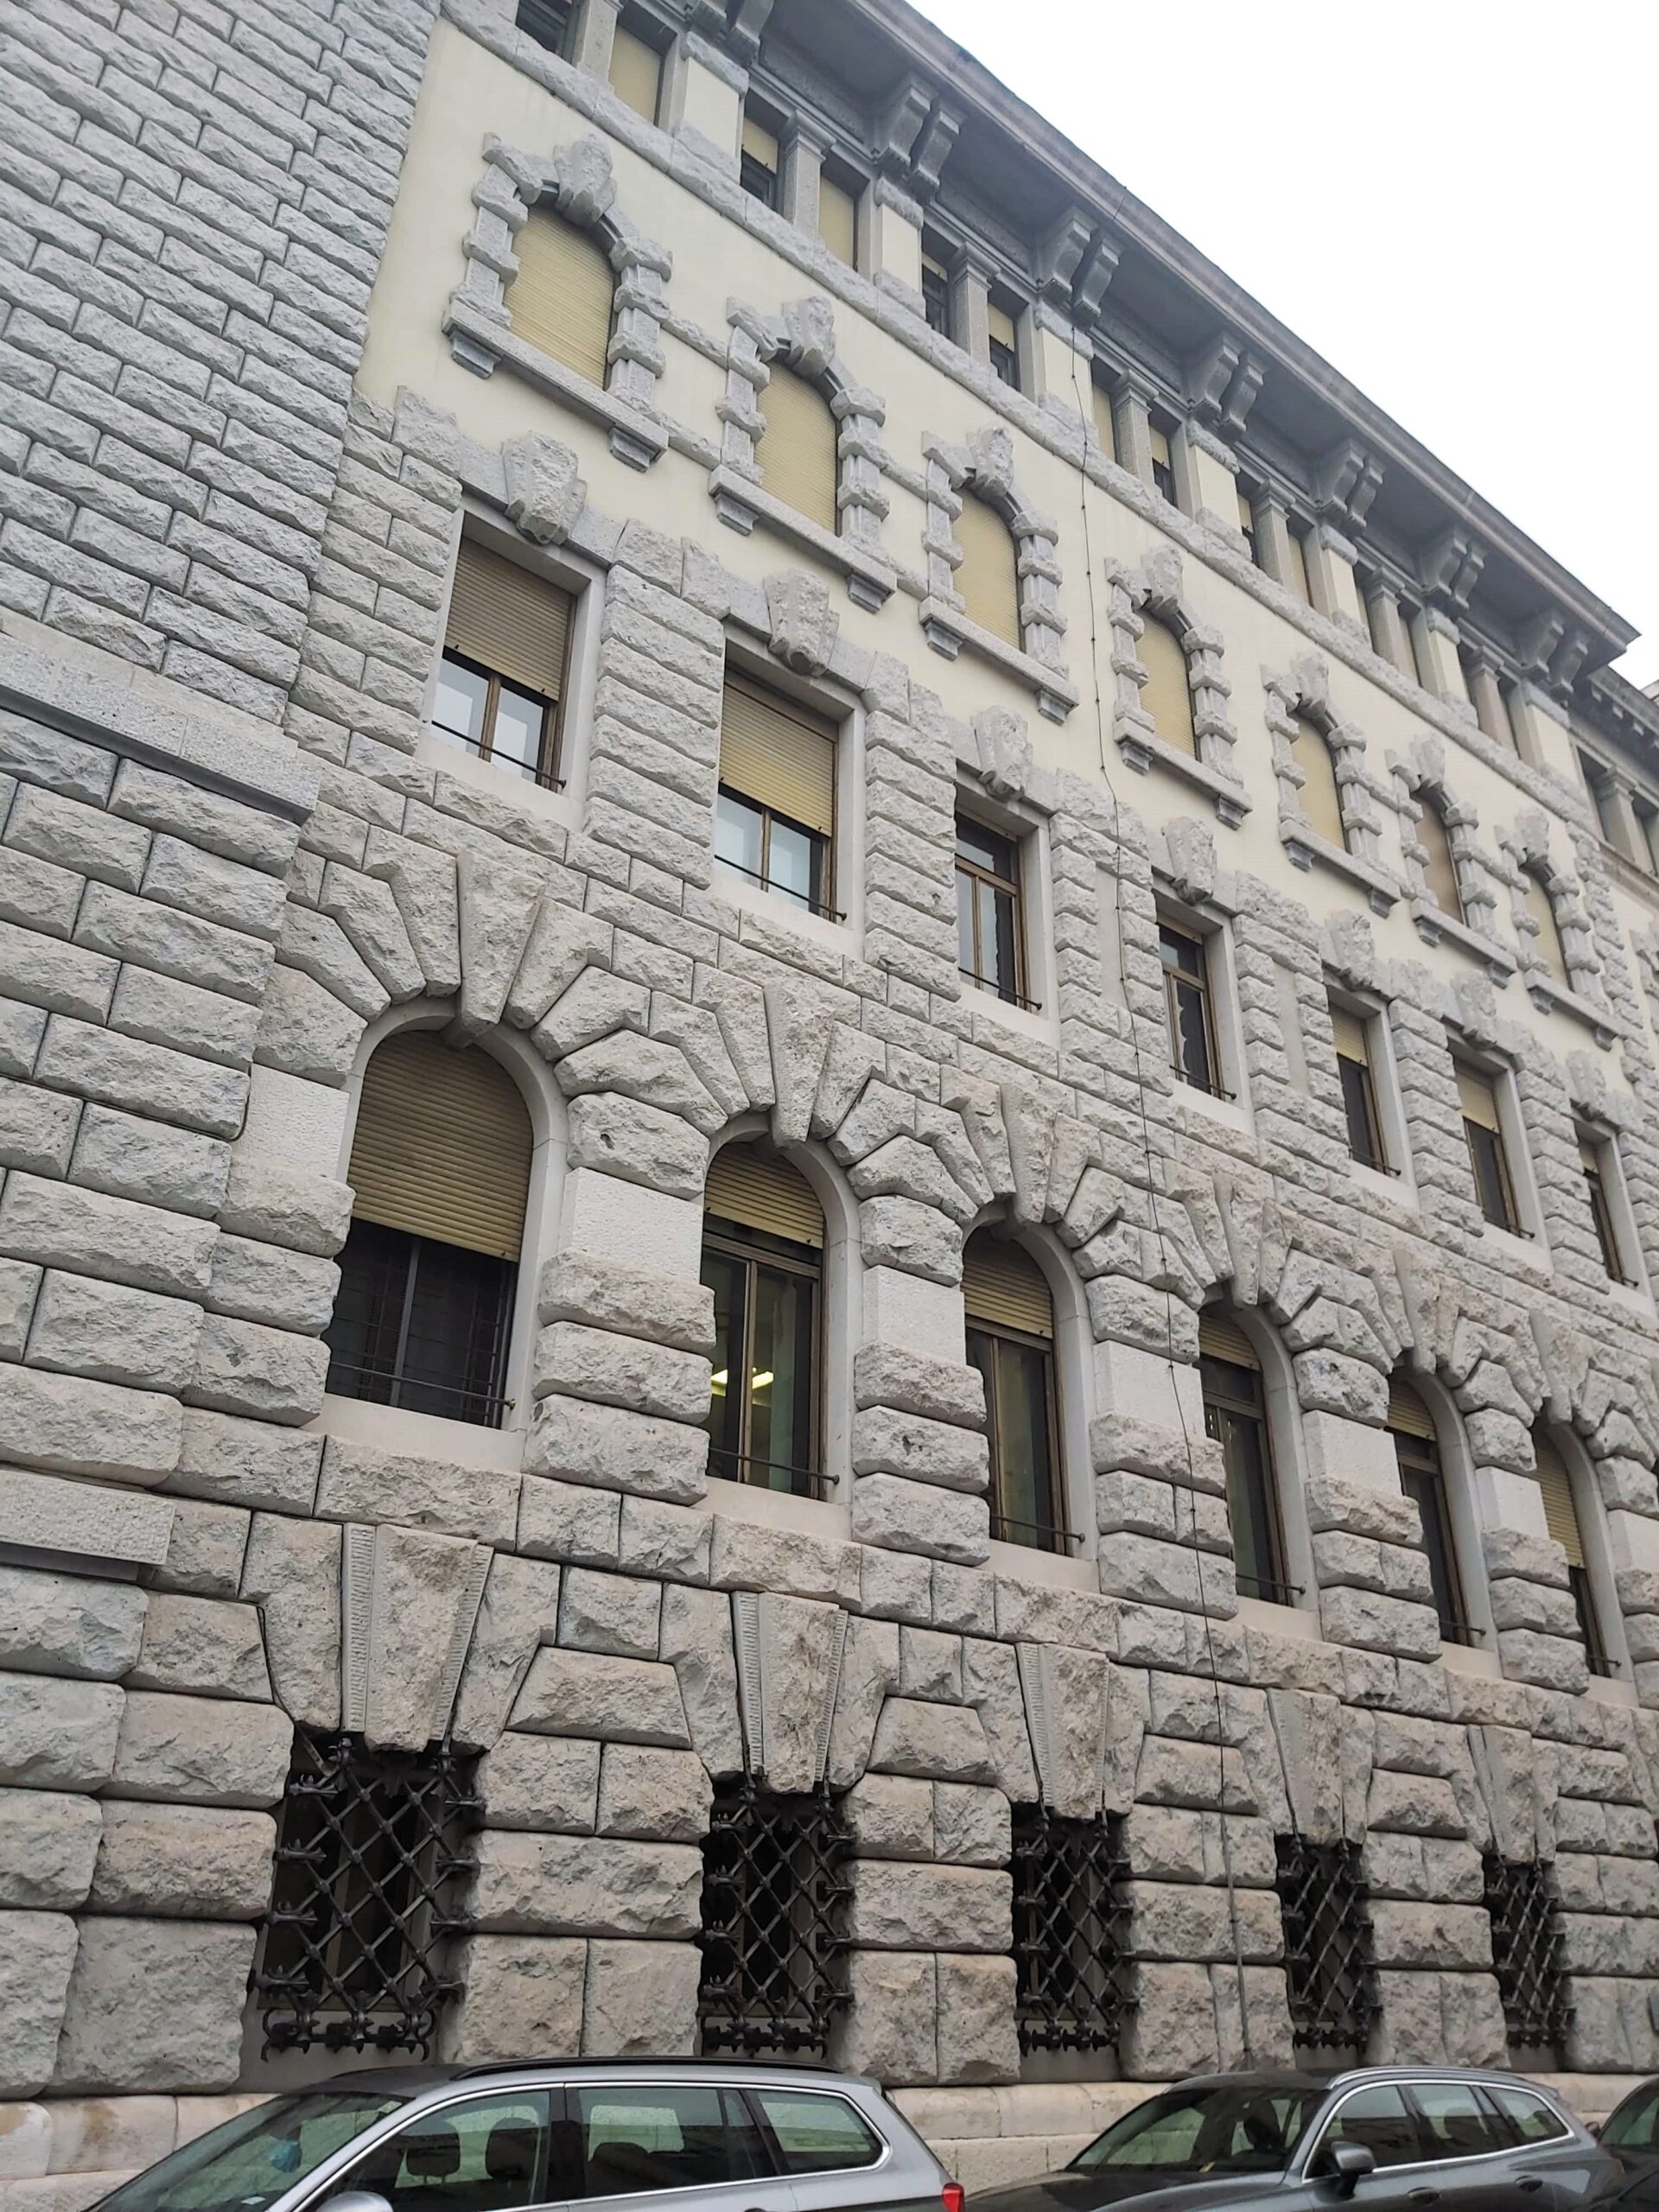 The fancy facade of a stone building in Trieste, Italy